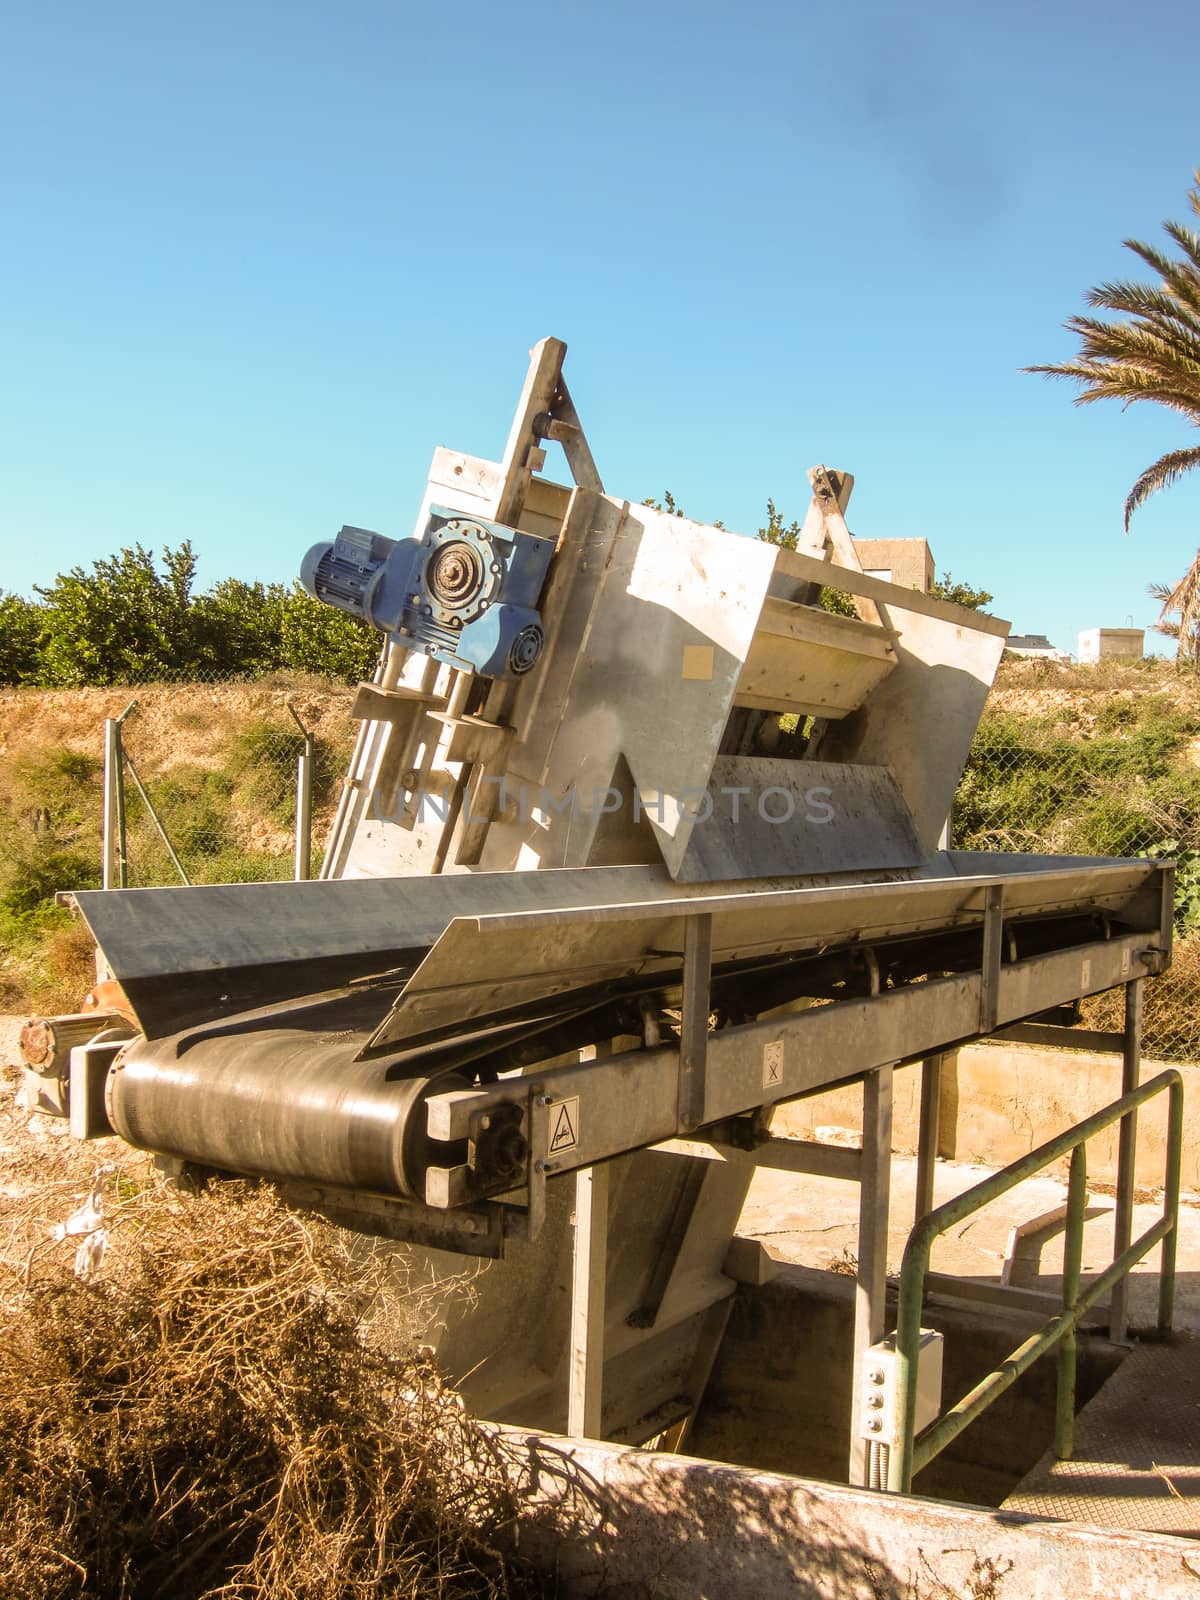 aquaduct cleaning machine in use on spanish aquaduct